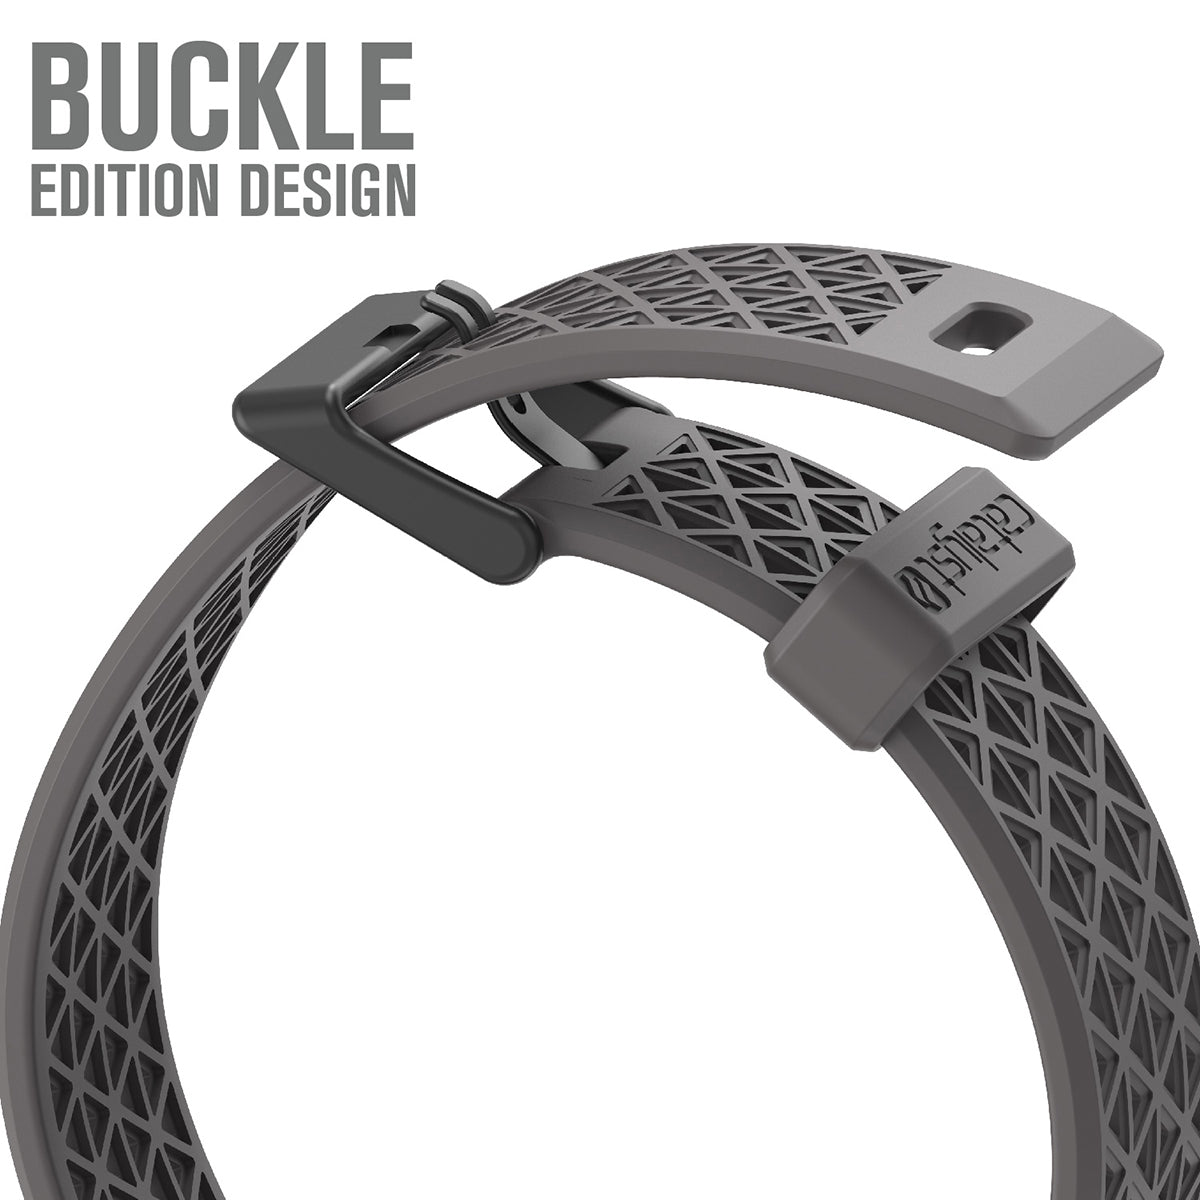 catalyst apple watch series 9 8 7 6 5 4 SE Gen 2 1 38 40 41mm sport band buckle edition showing the buckle edition design space gray text reads buckle edition design